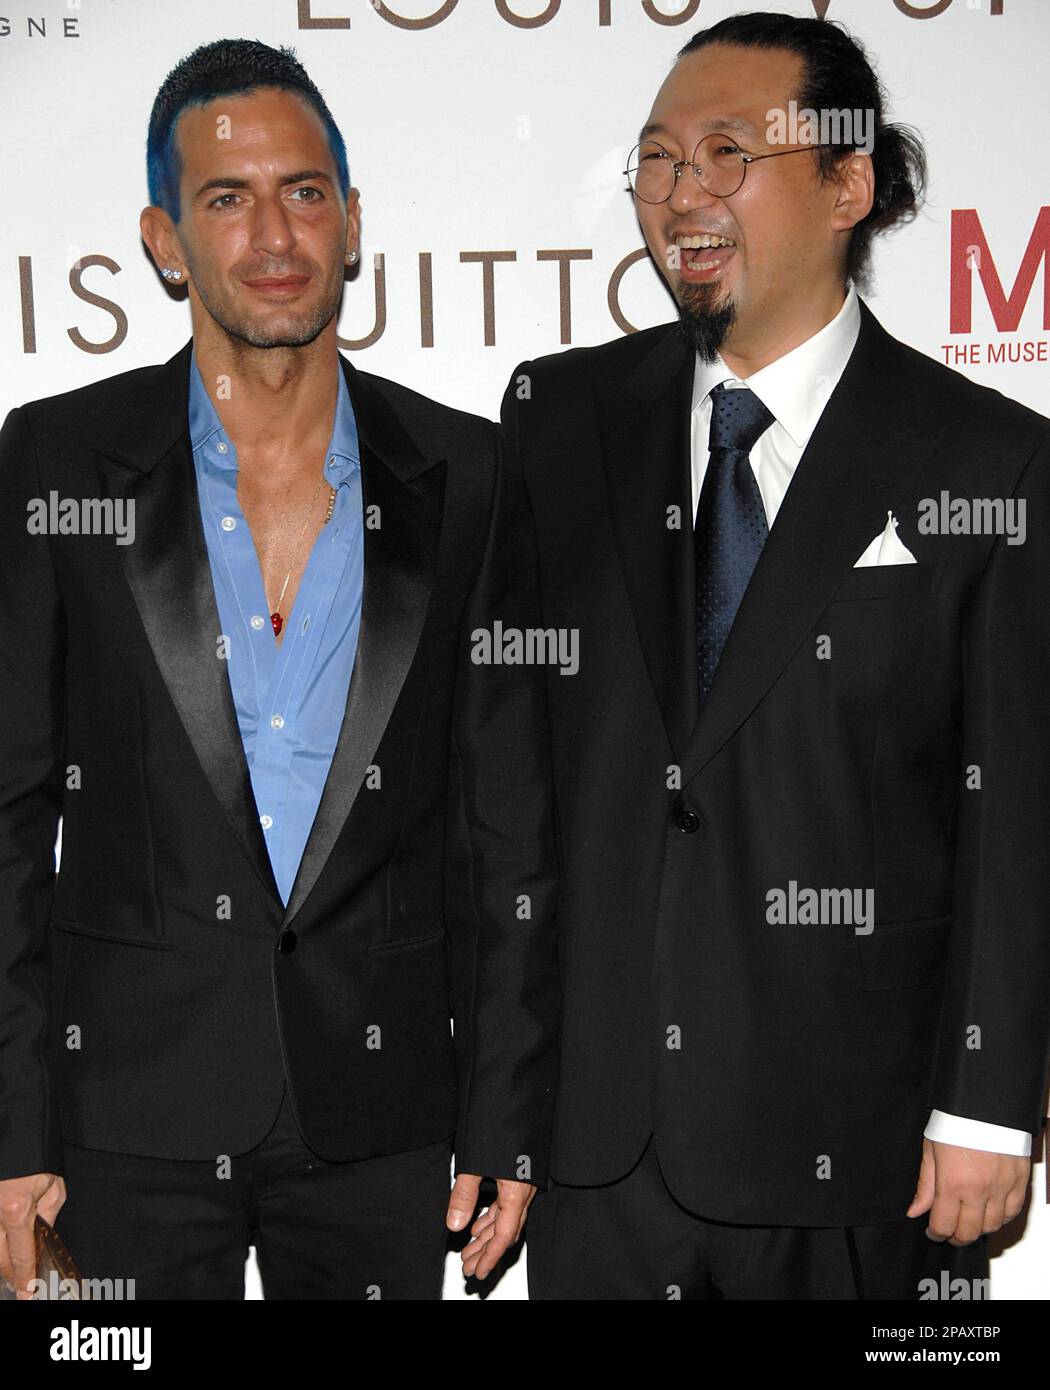 Fashion designer Marc Jacobs, left, and artist Takashi Murakami, right,  pose on the press line at the Murakami Exhibition Gala honoring Louis  Vuitton artistic director Marc Jacobs in Los Angeles on Sunday